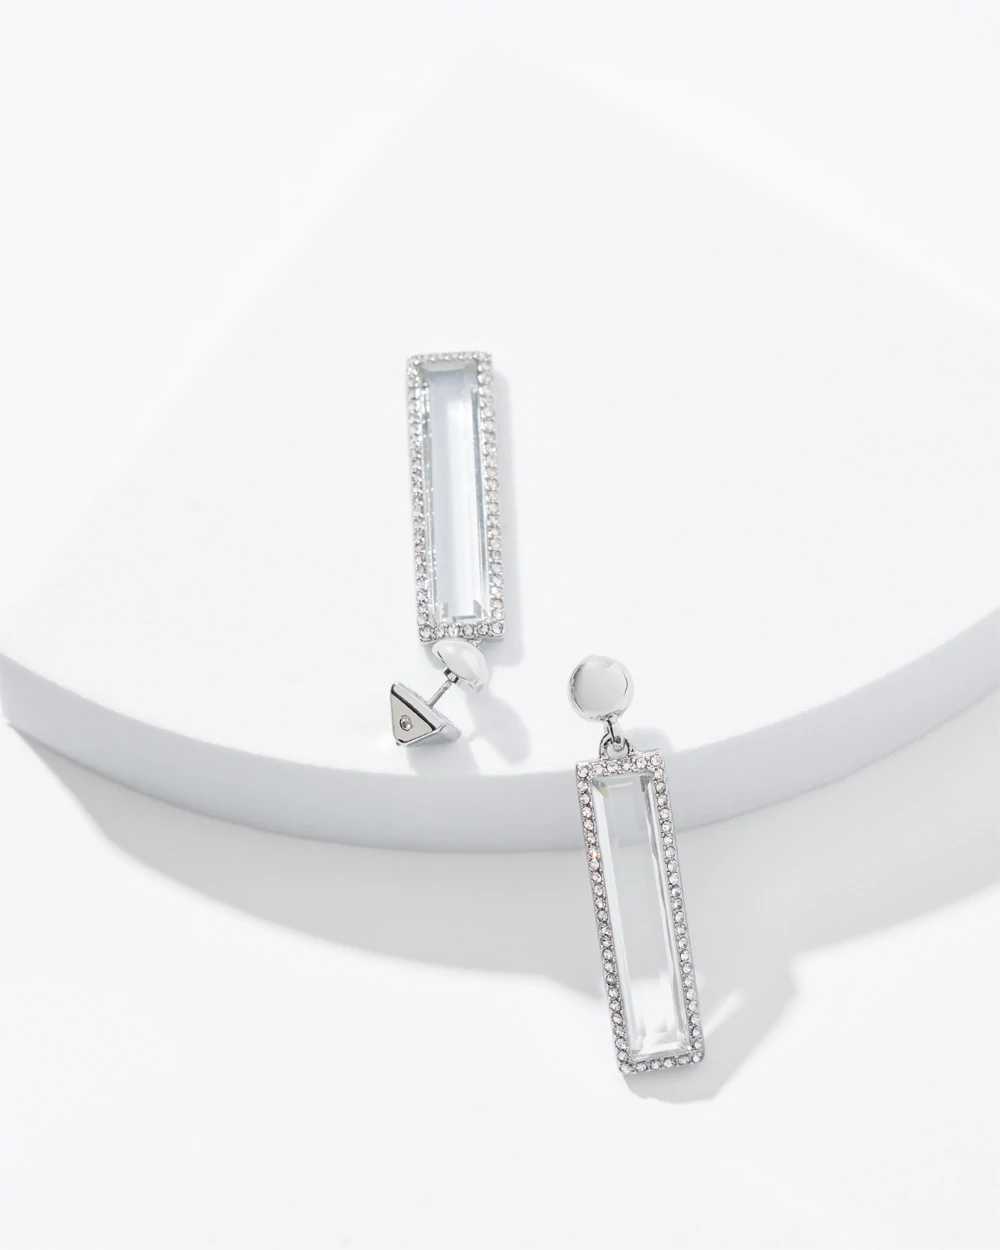 Silver Pave Crystal Linear Earrings click to view larger image.